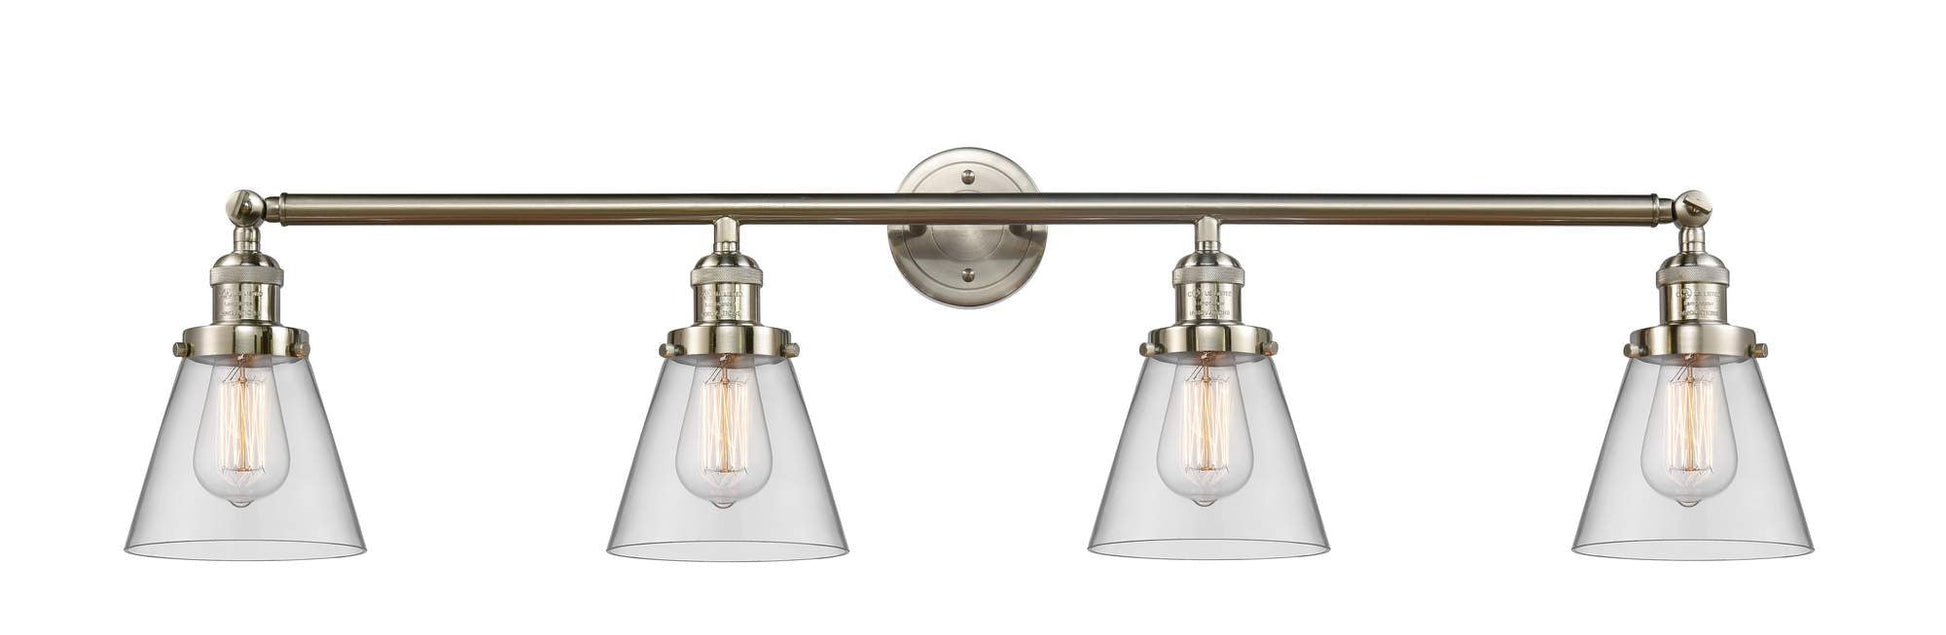 215-SN-G62 4-Light 42.25" Brushed Satin Nickel Bath Vanity Light - Clear Small Cone Glass - LED Bulb - Dimmensions: 42.25 x 7.625 x 9.75 - Glass Up or Down: Yes